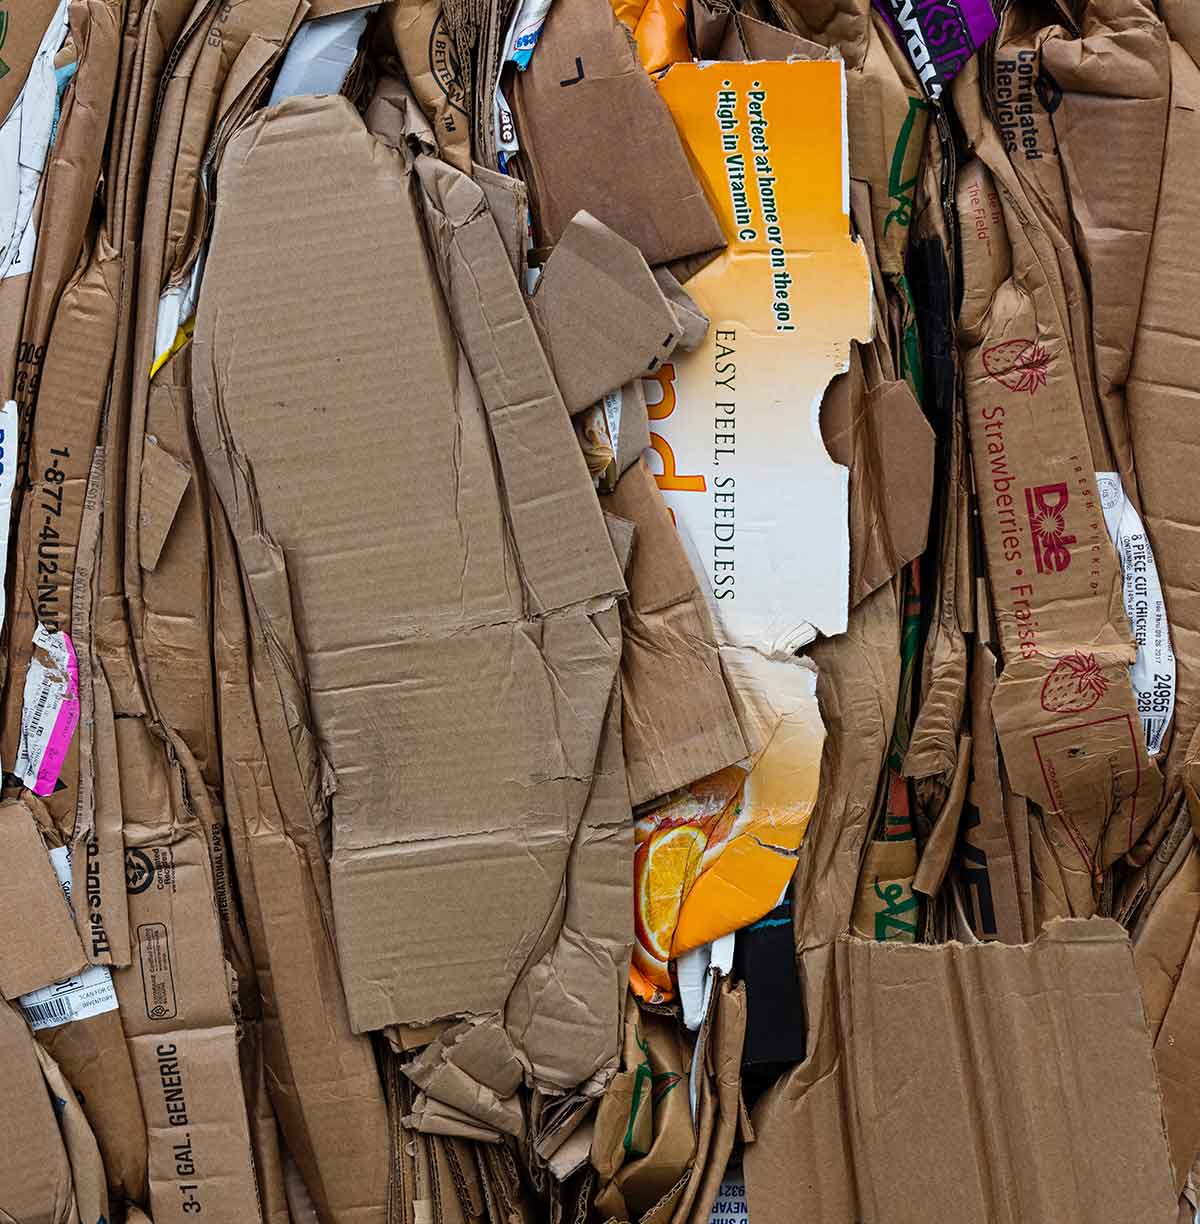 Properly broken down cardboard for recycling.